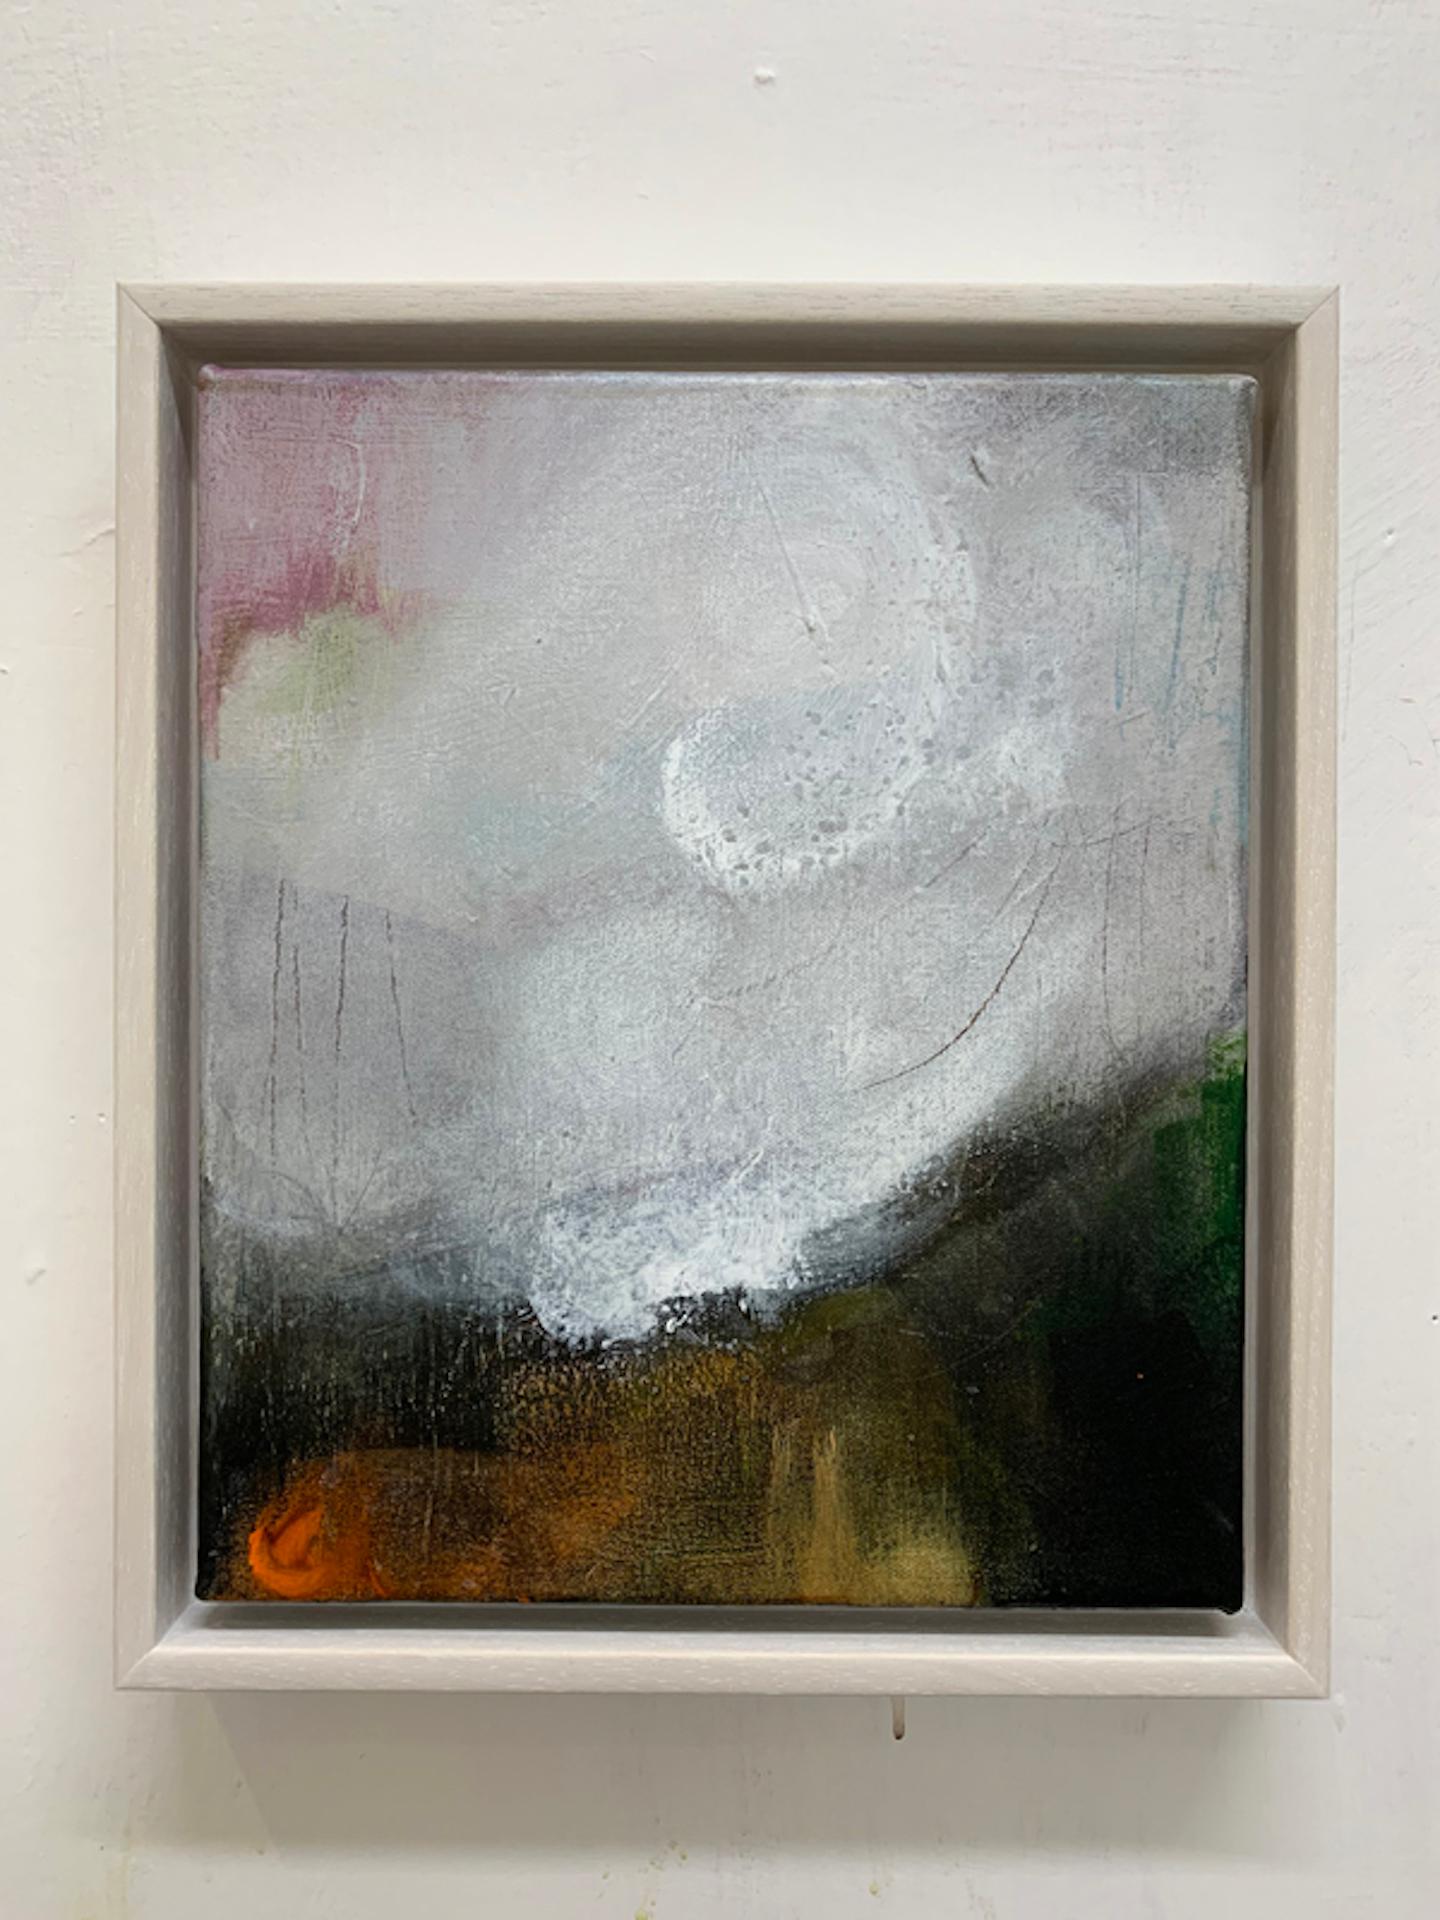 Jill Campbell
Fell Clouds 2 
Original Landscape Painting
Acrylic on canvas
Image Size: H 30cm x W 25cm x D 1.5cm
Framed Size: H 34cm x W 29cm x D 3cm
Sold Framed (Wooden White Float Frame)
Free Shipping
Please note that in situ images are purely an